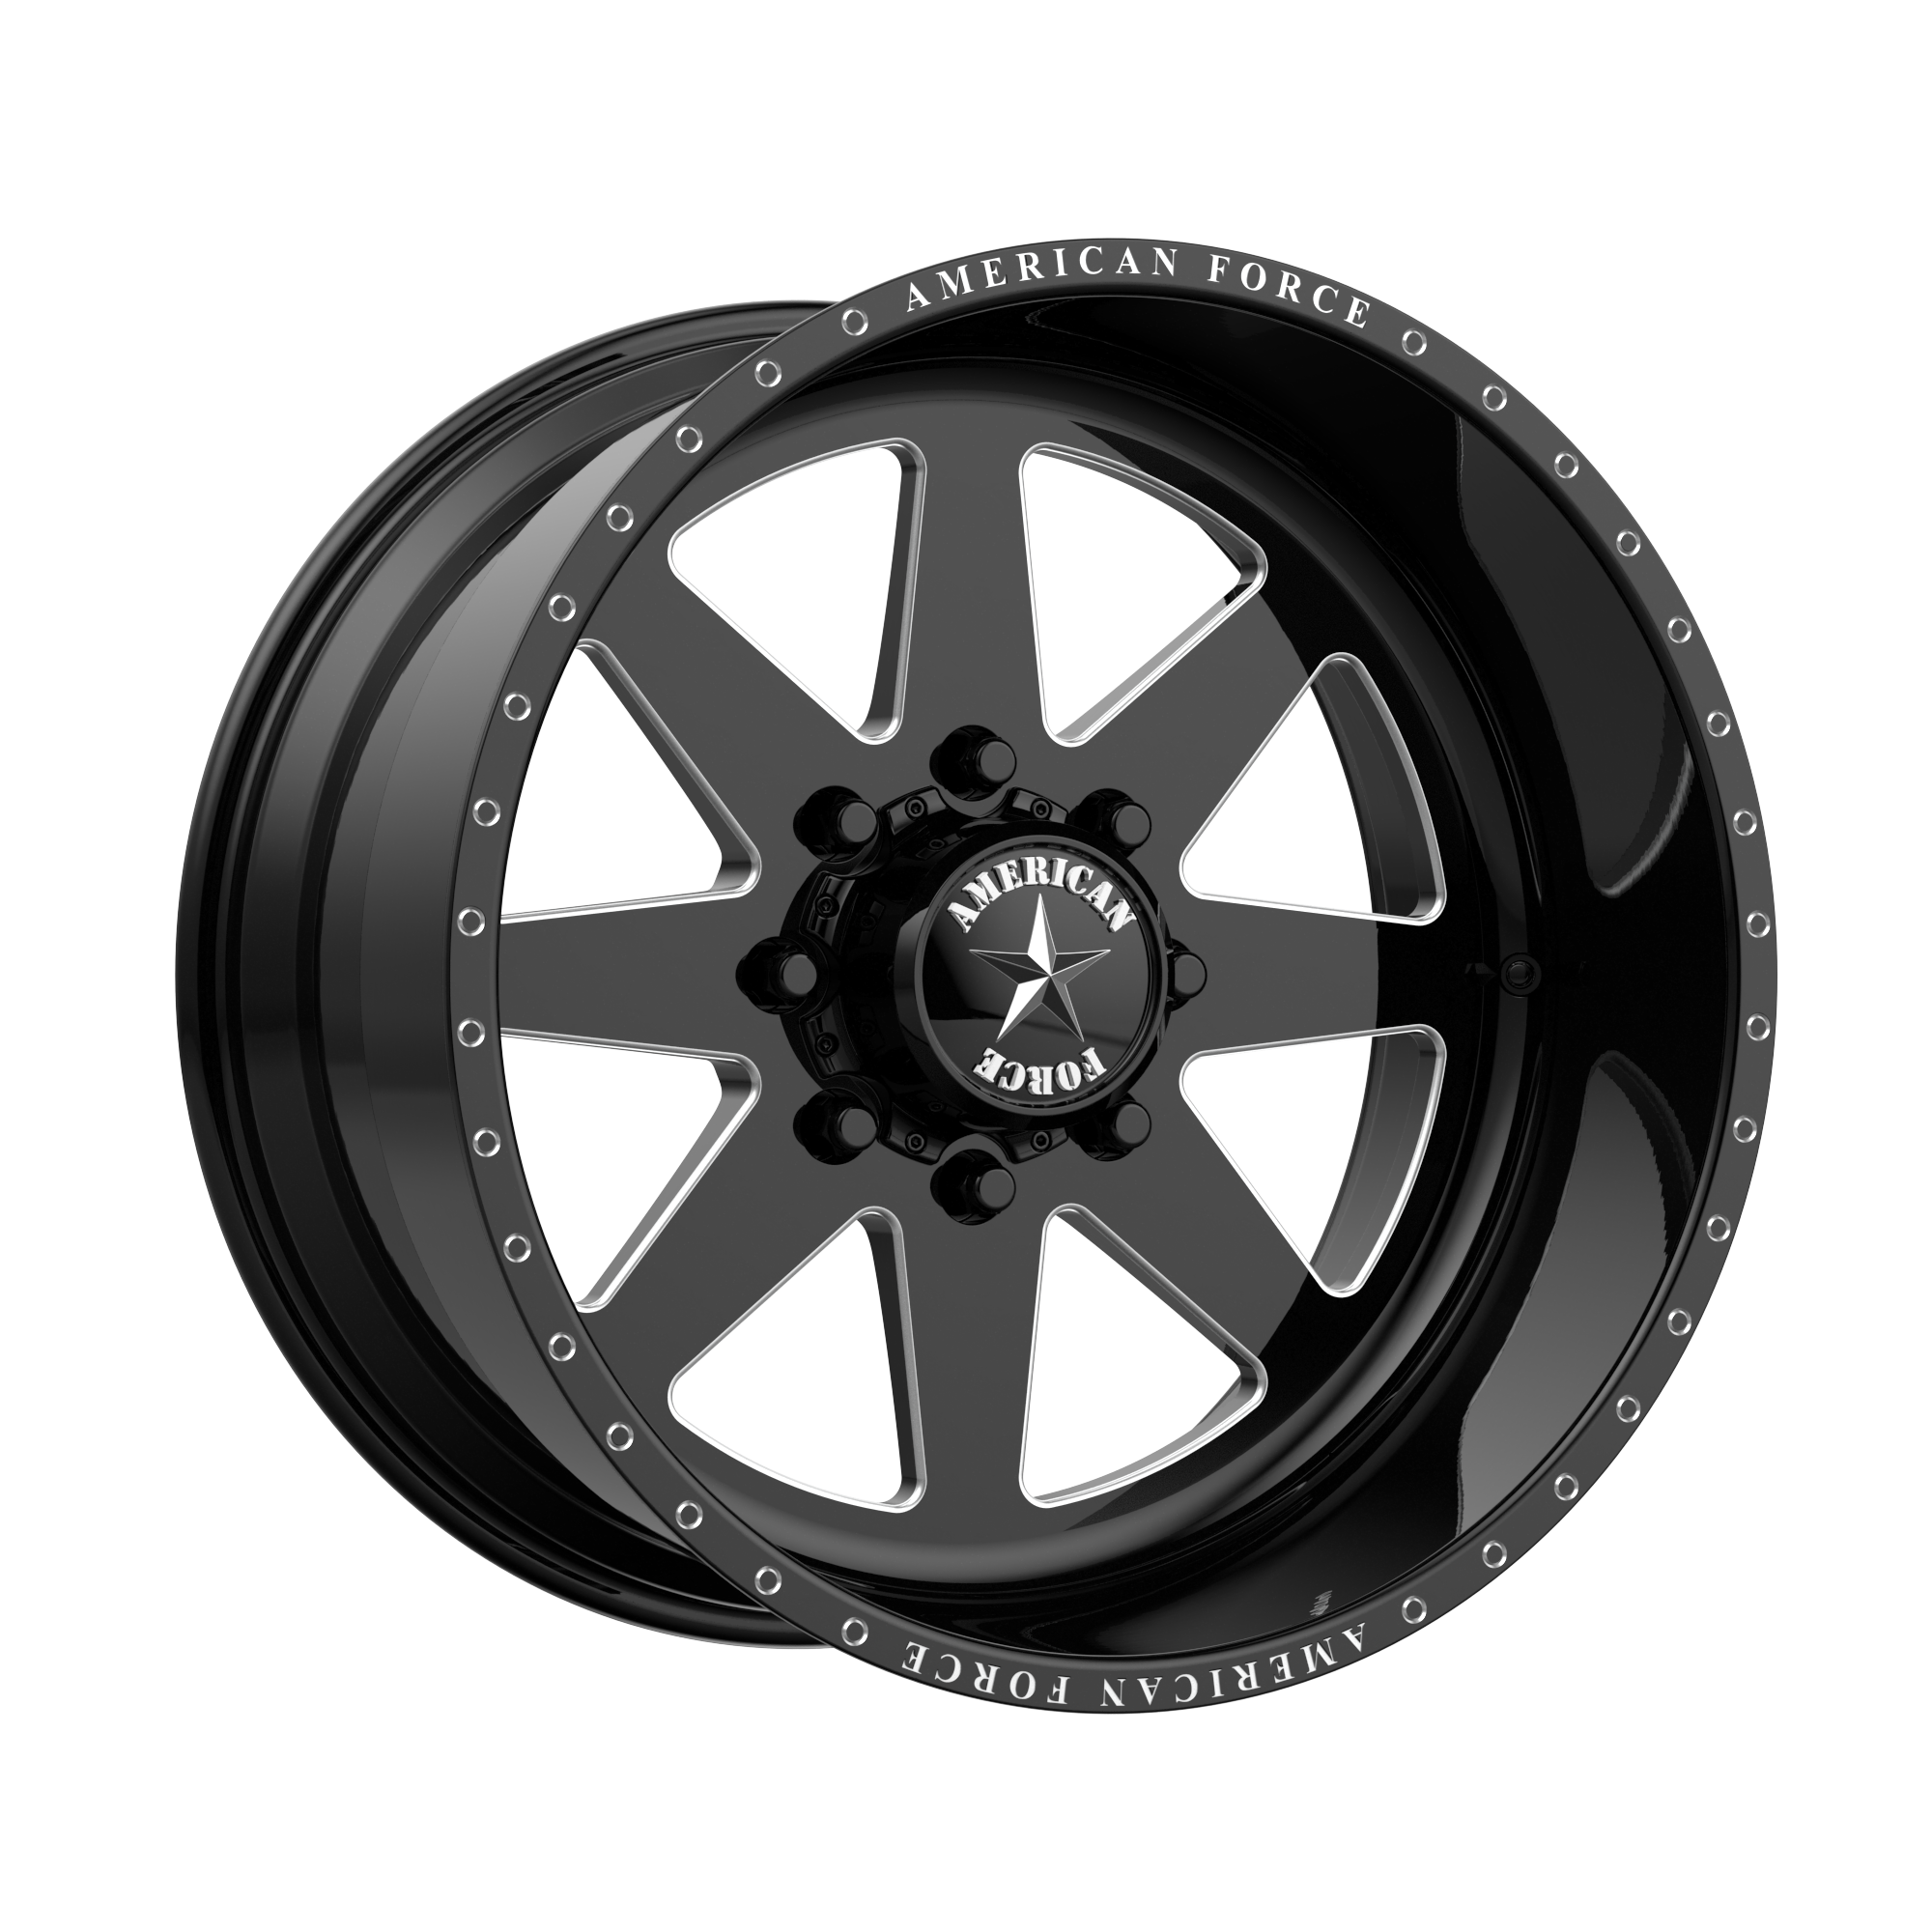 INDEPENDENCE SS 26x16 8x165.10 GLOSS BLACK MACHINED (-101 mm) - Tires and Engine Performance